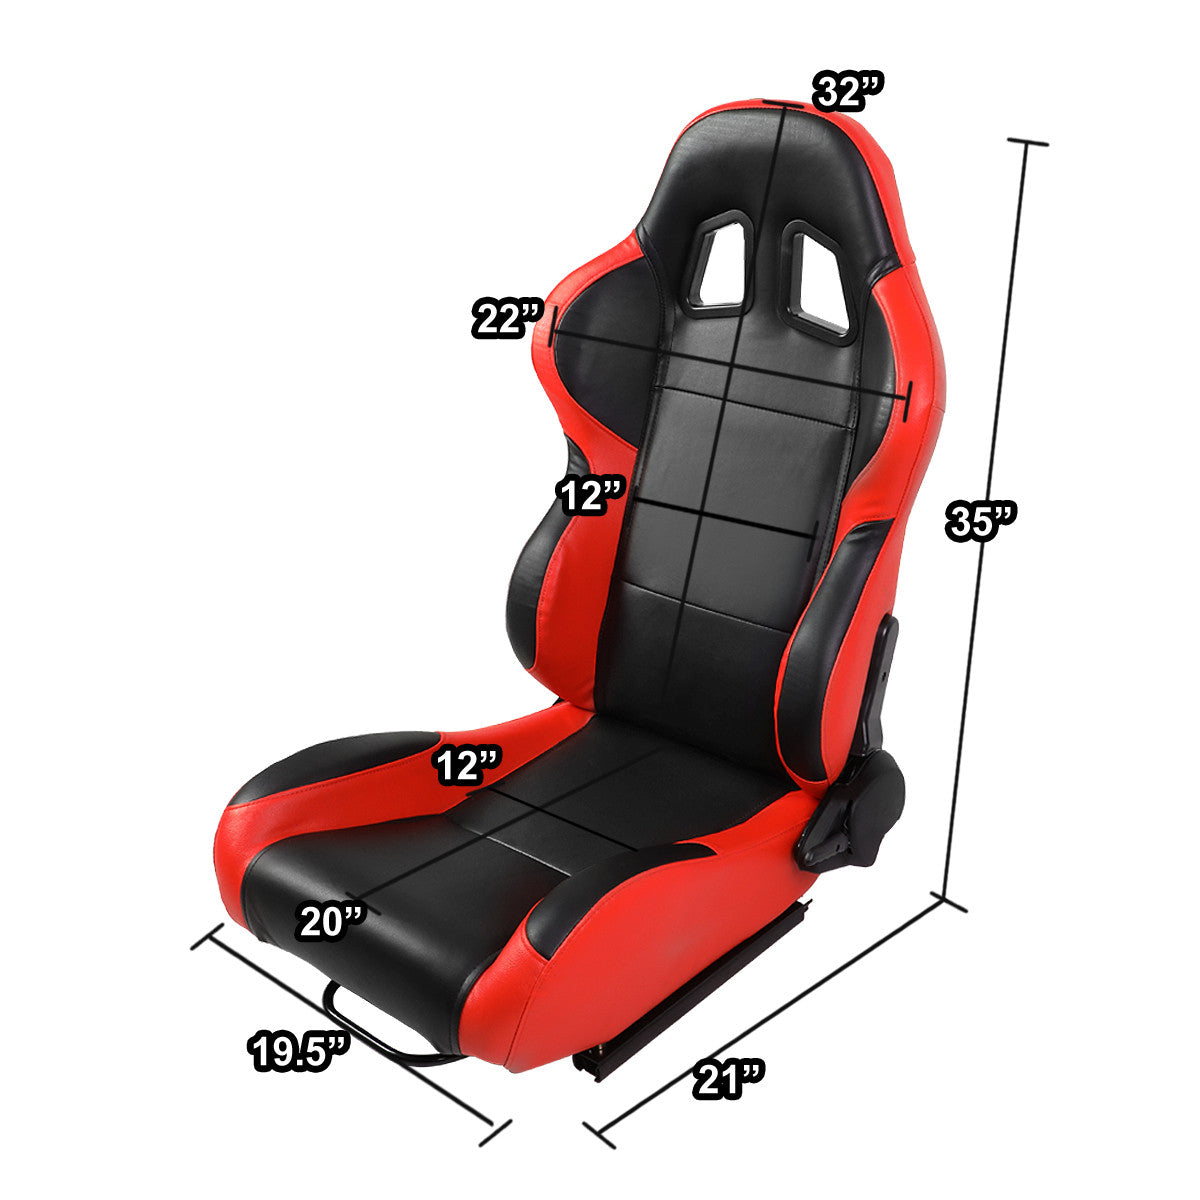 Racing Seats - Reclinable - Type-R - PVC Leather - Pair